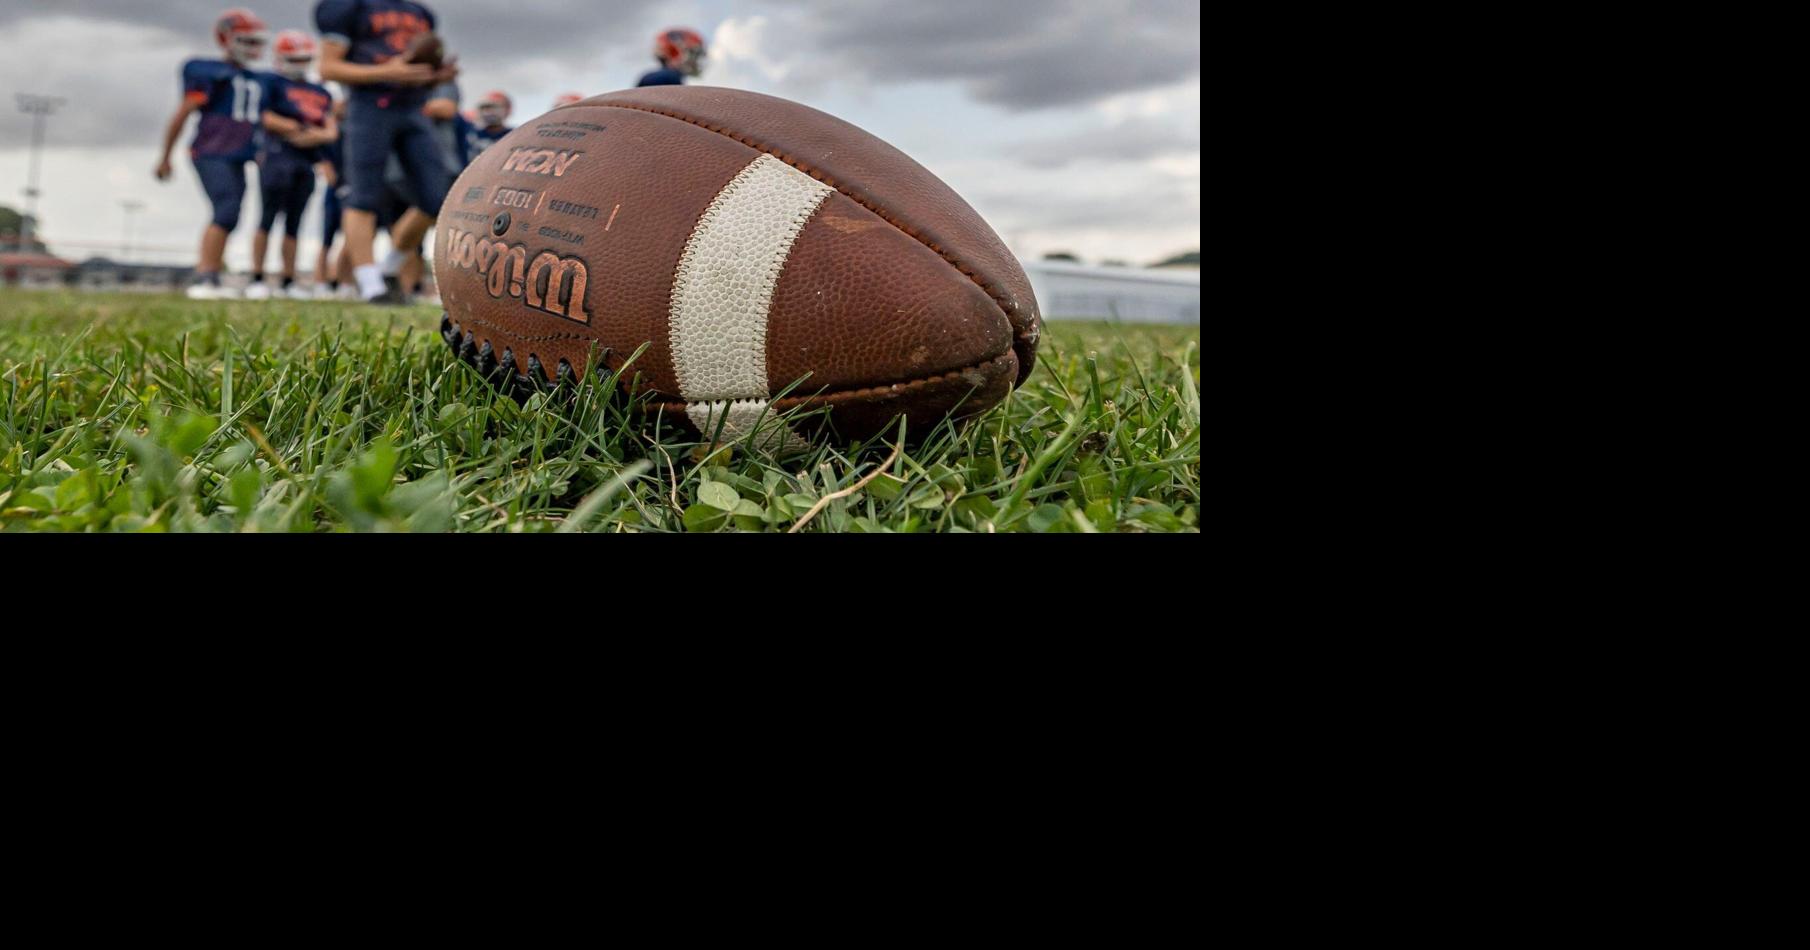 Live Week 9 score updates from throughout the Central Illinois area